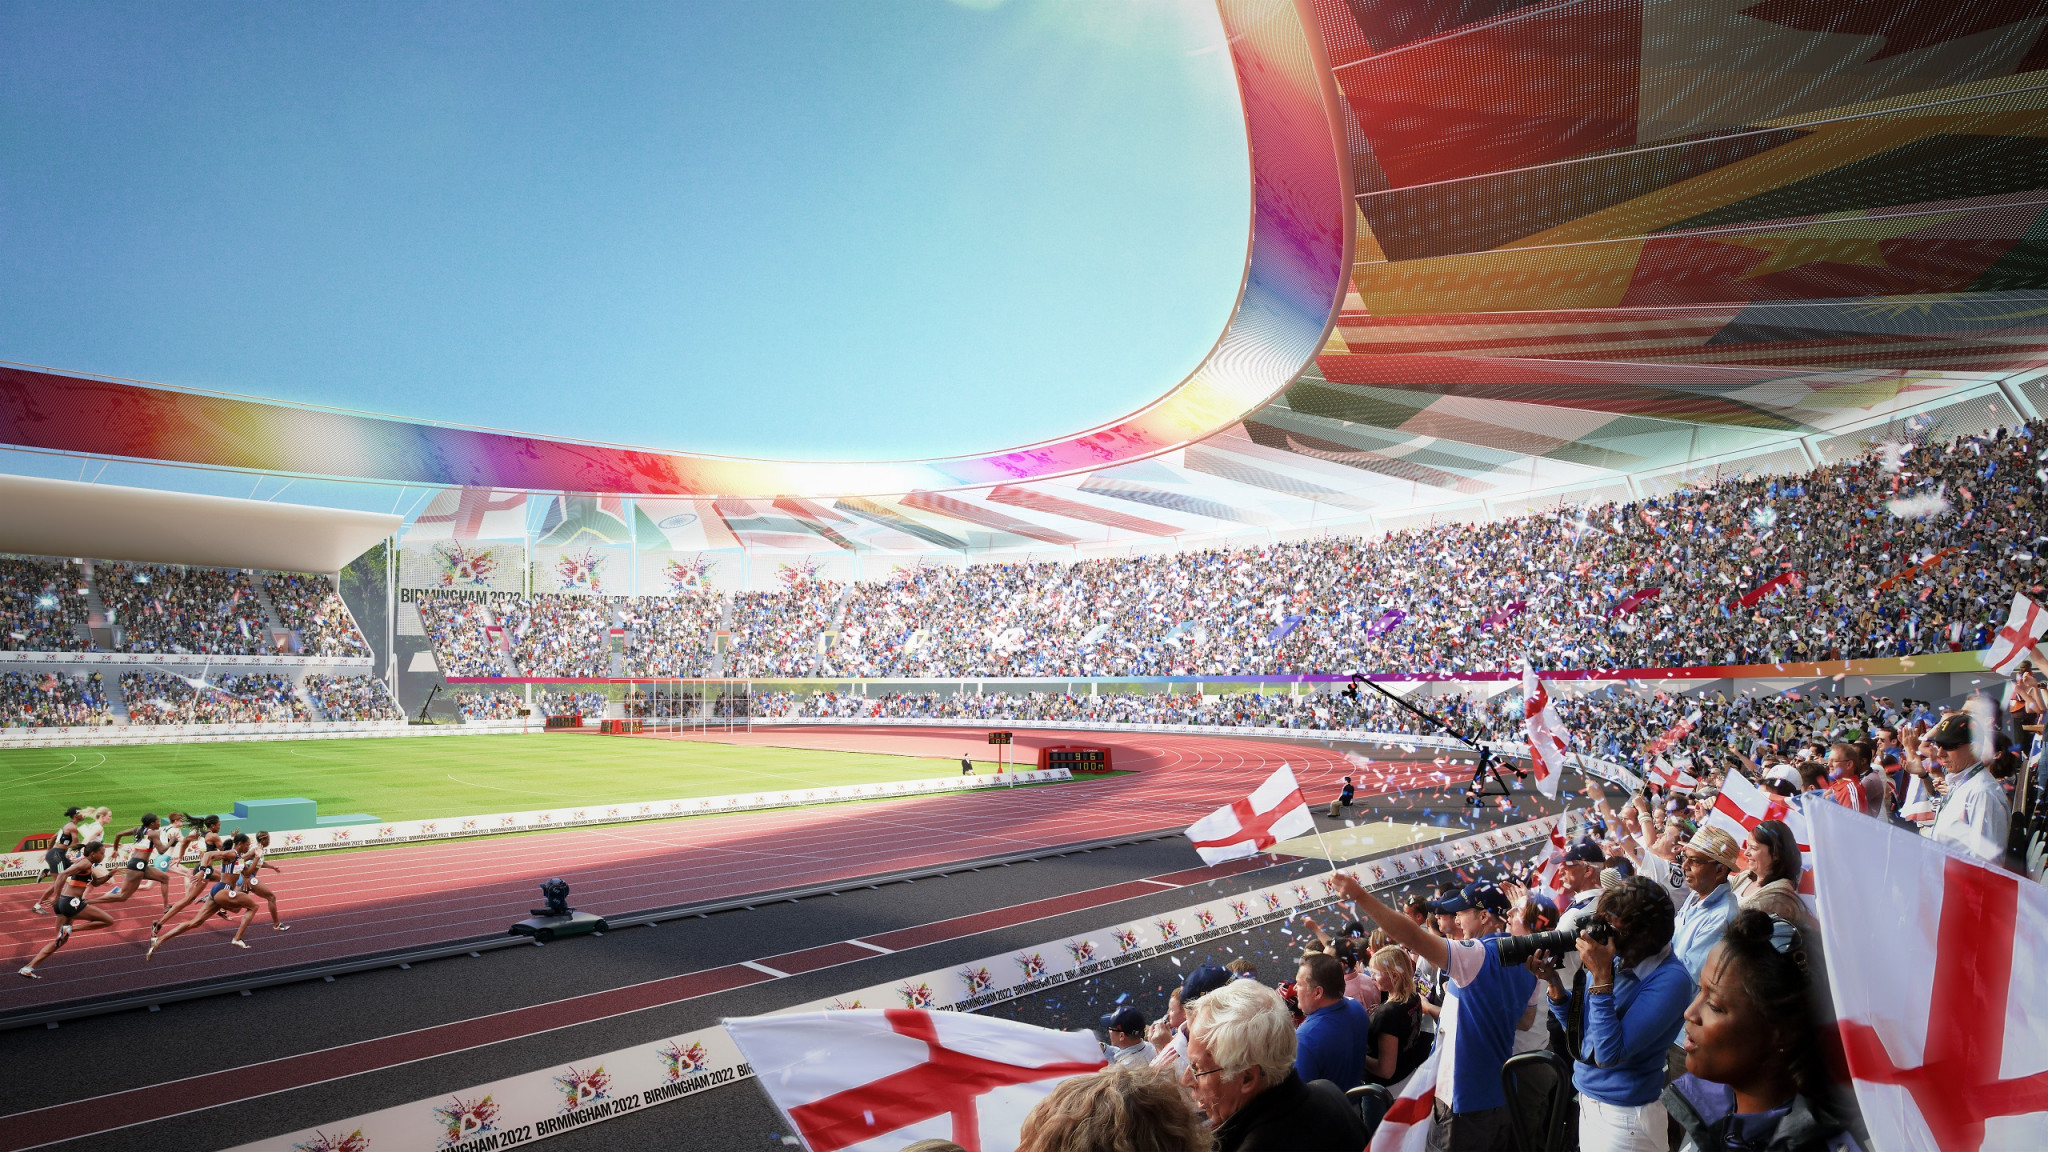 Mace are set to serve as project managers on the revamp of the Alexander Stadium ©Birmingham 2022